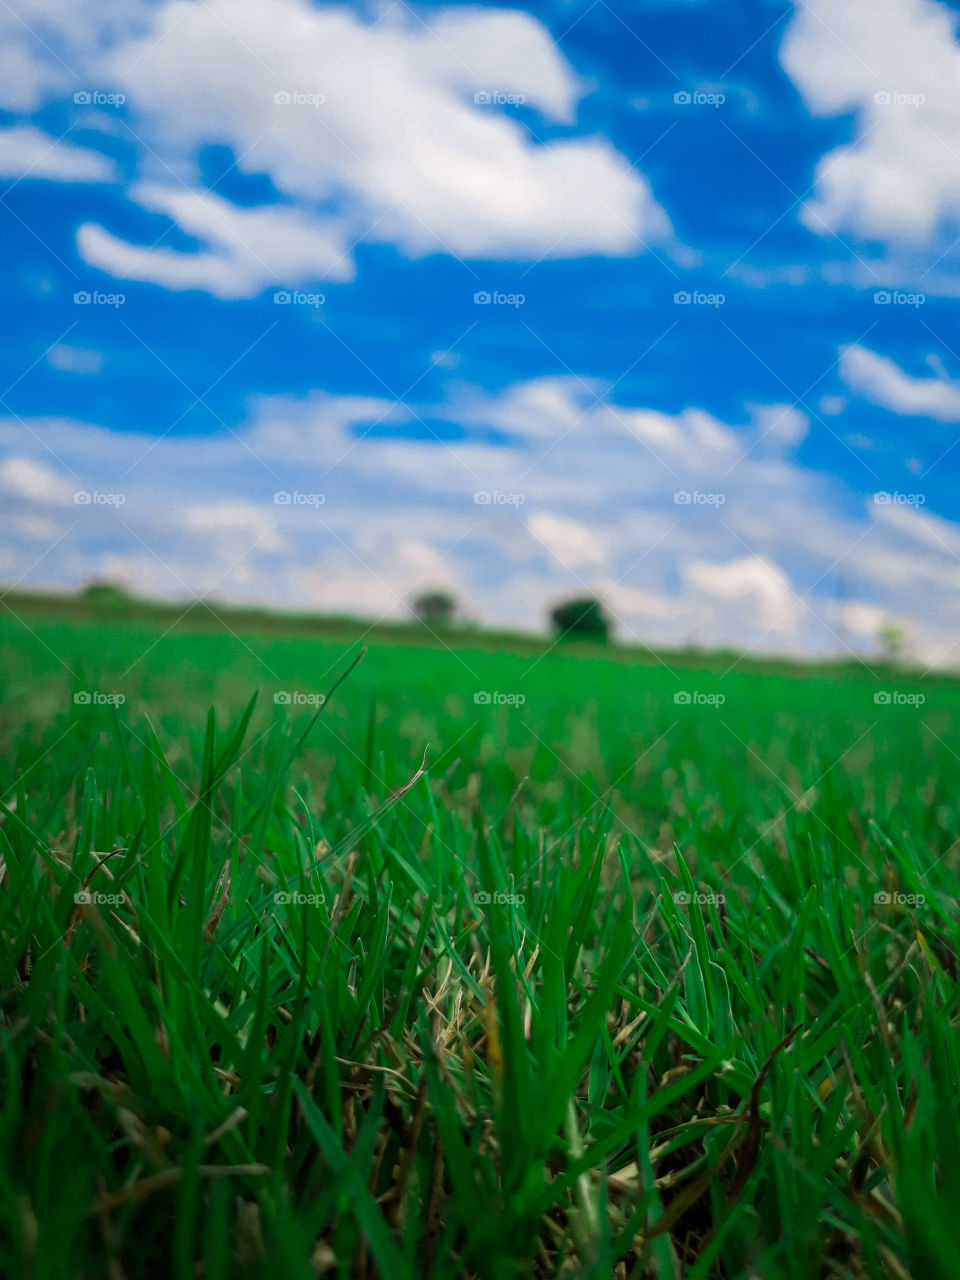 Photoshoot with green grass and blue sky.
Widht:3096
Height:4128
FileSize:4.02MB
Focal Length:3.6MM